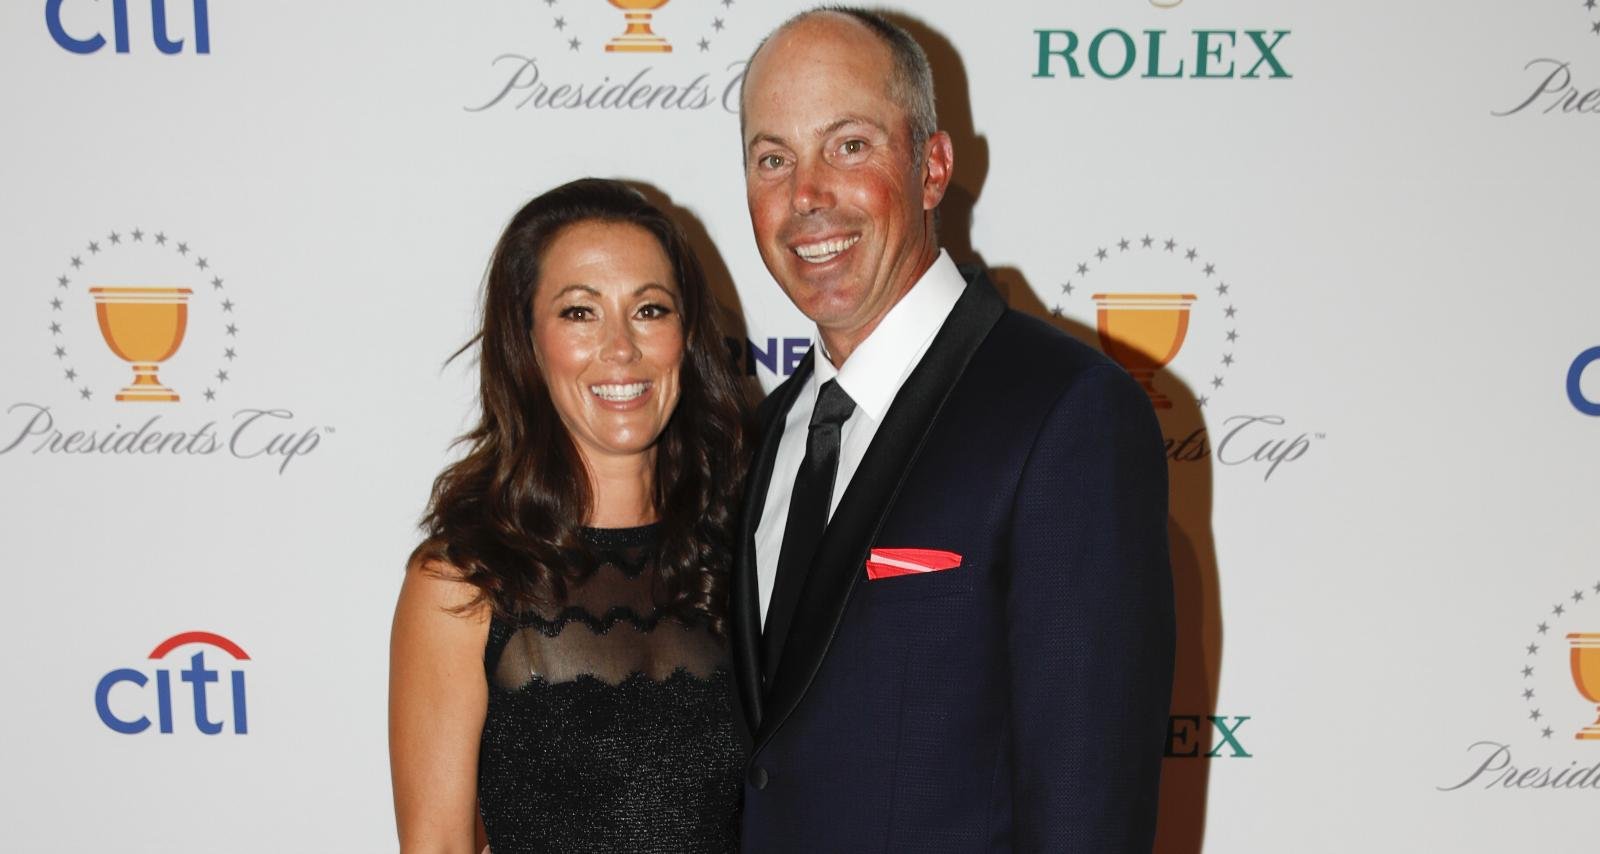 Sybi Kuchar Wiki, Age, Family, Early Life, Kids, Education, Tennis and Facts about Matt Kuchar’s Wife